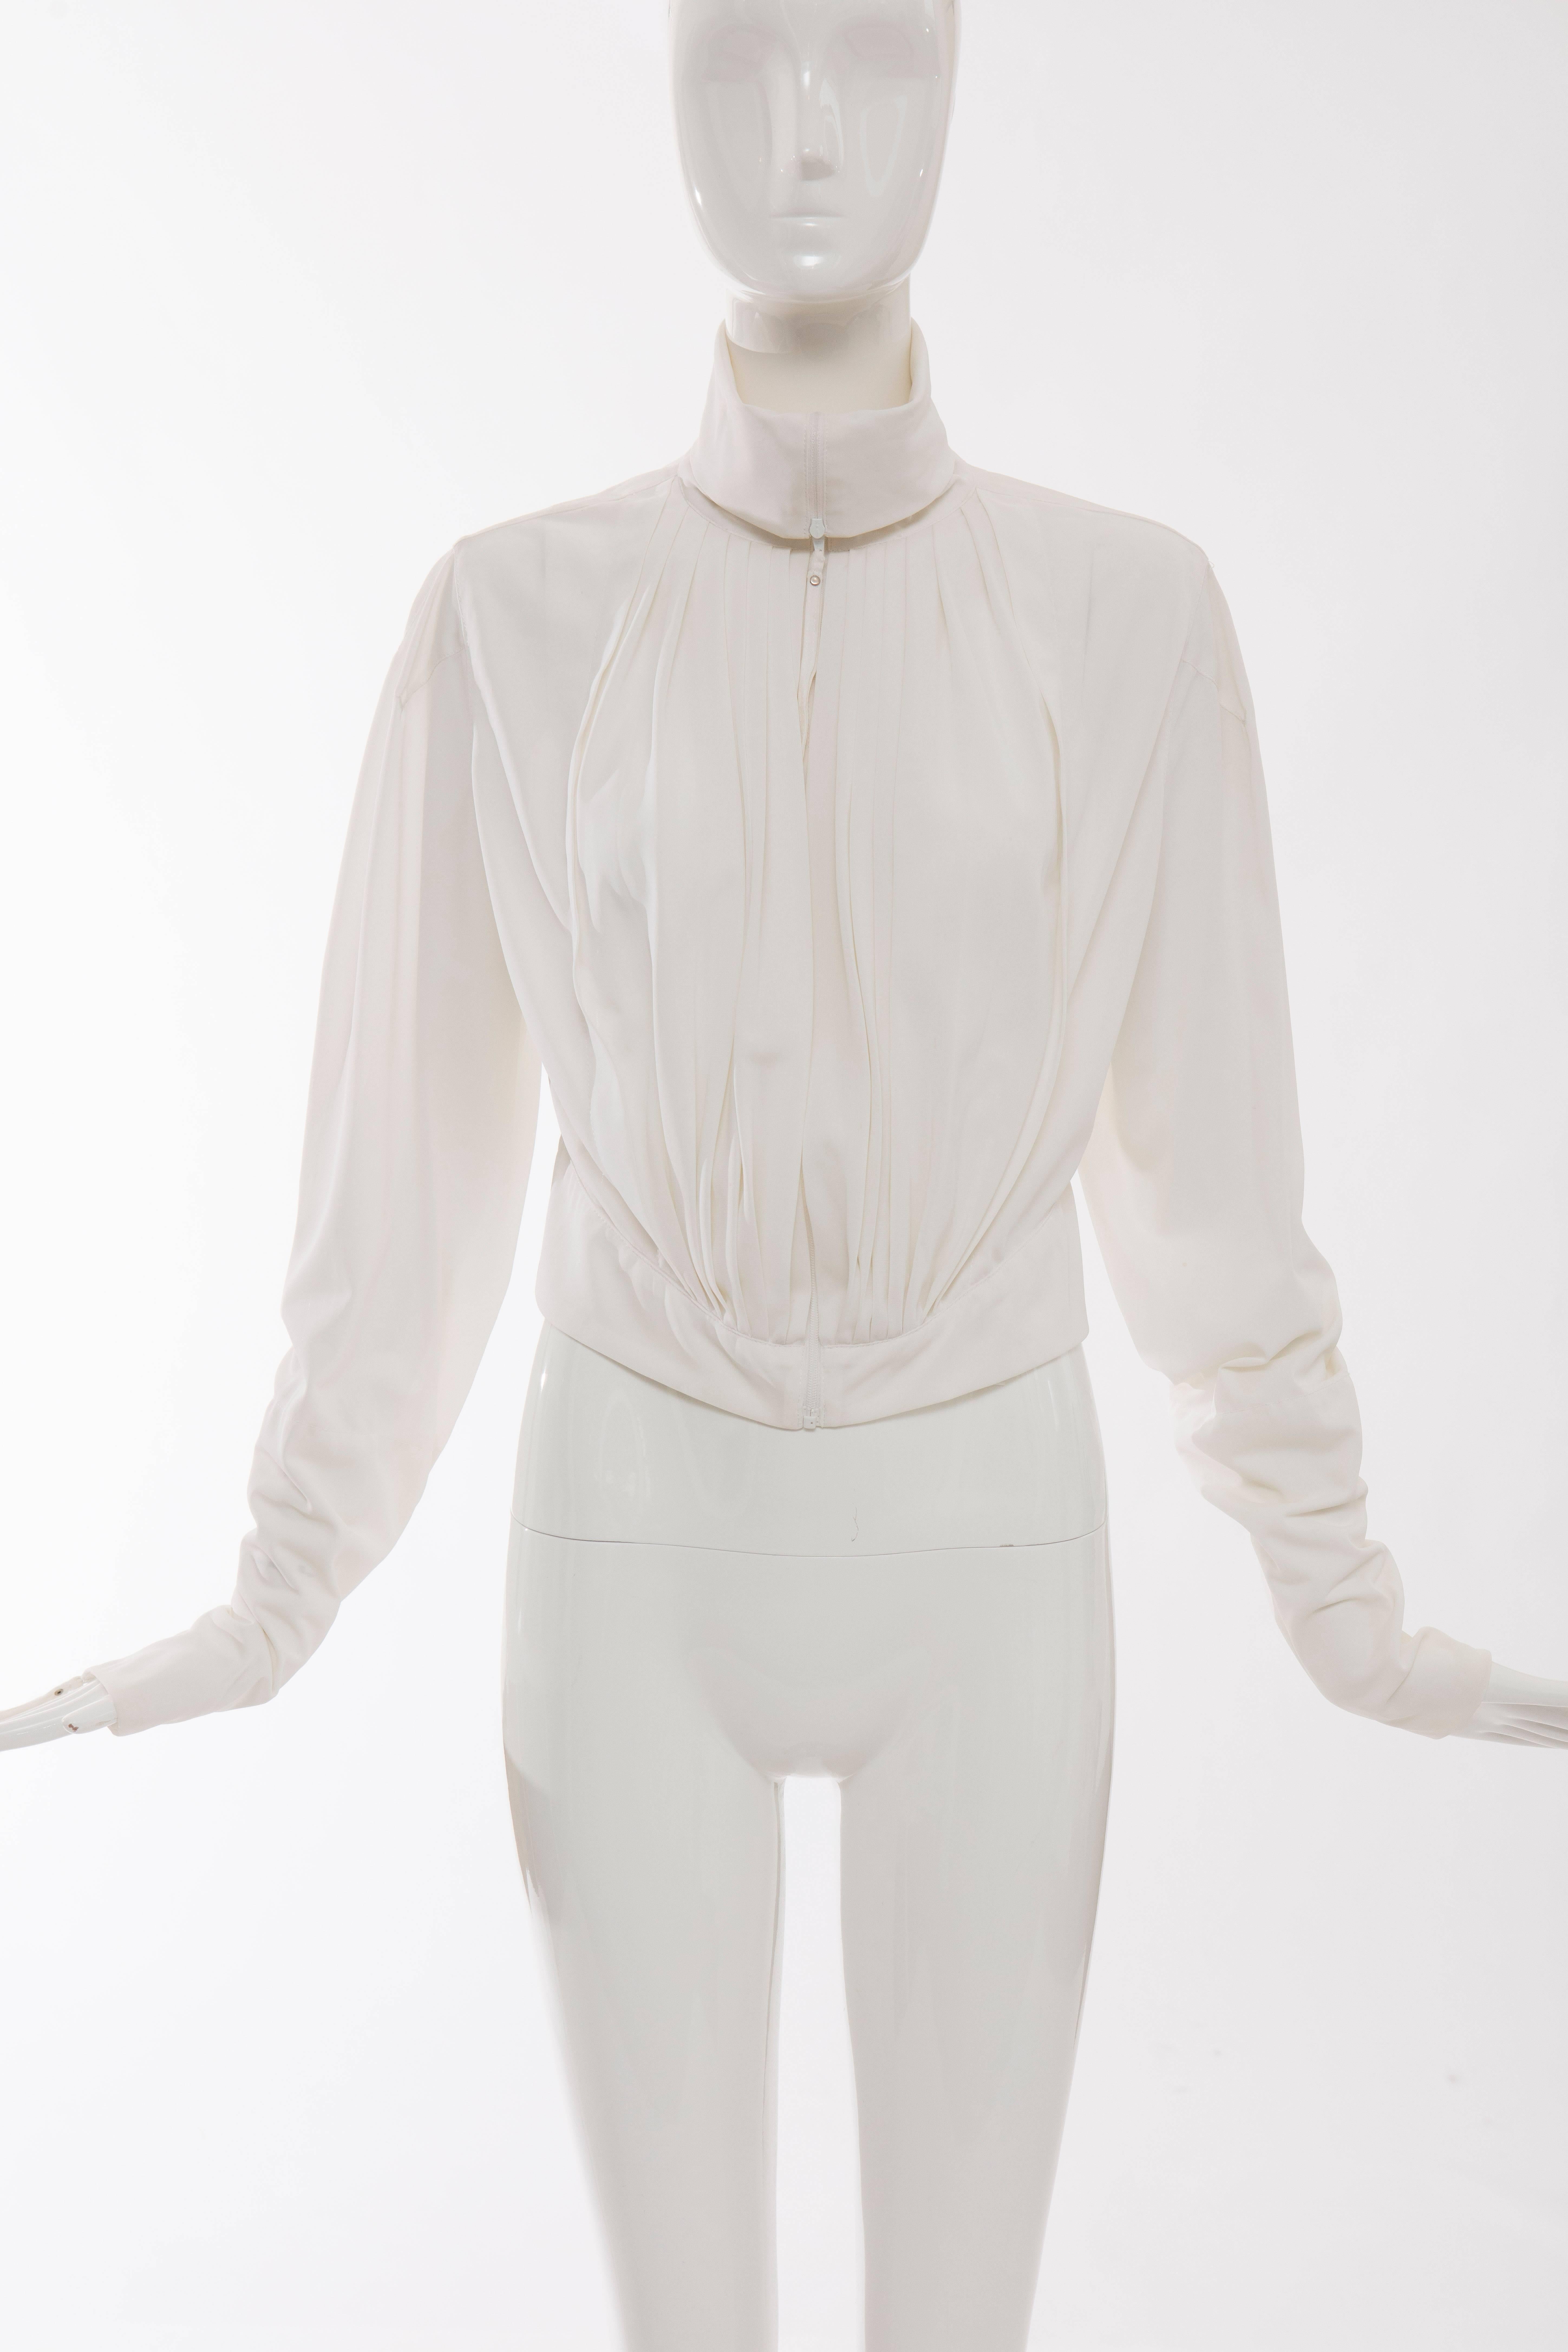 Gray Jean Paul Gaultier White Nylon Zip Front Jacket, Circa 1990s For Sale